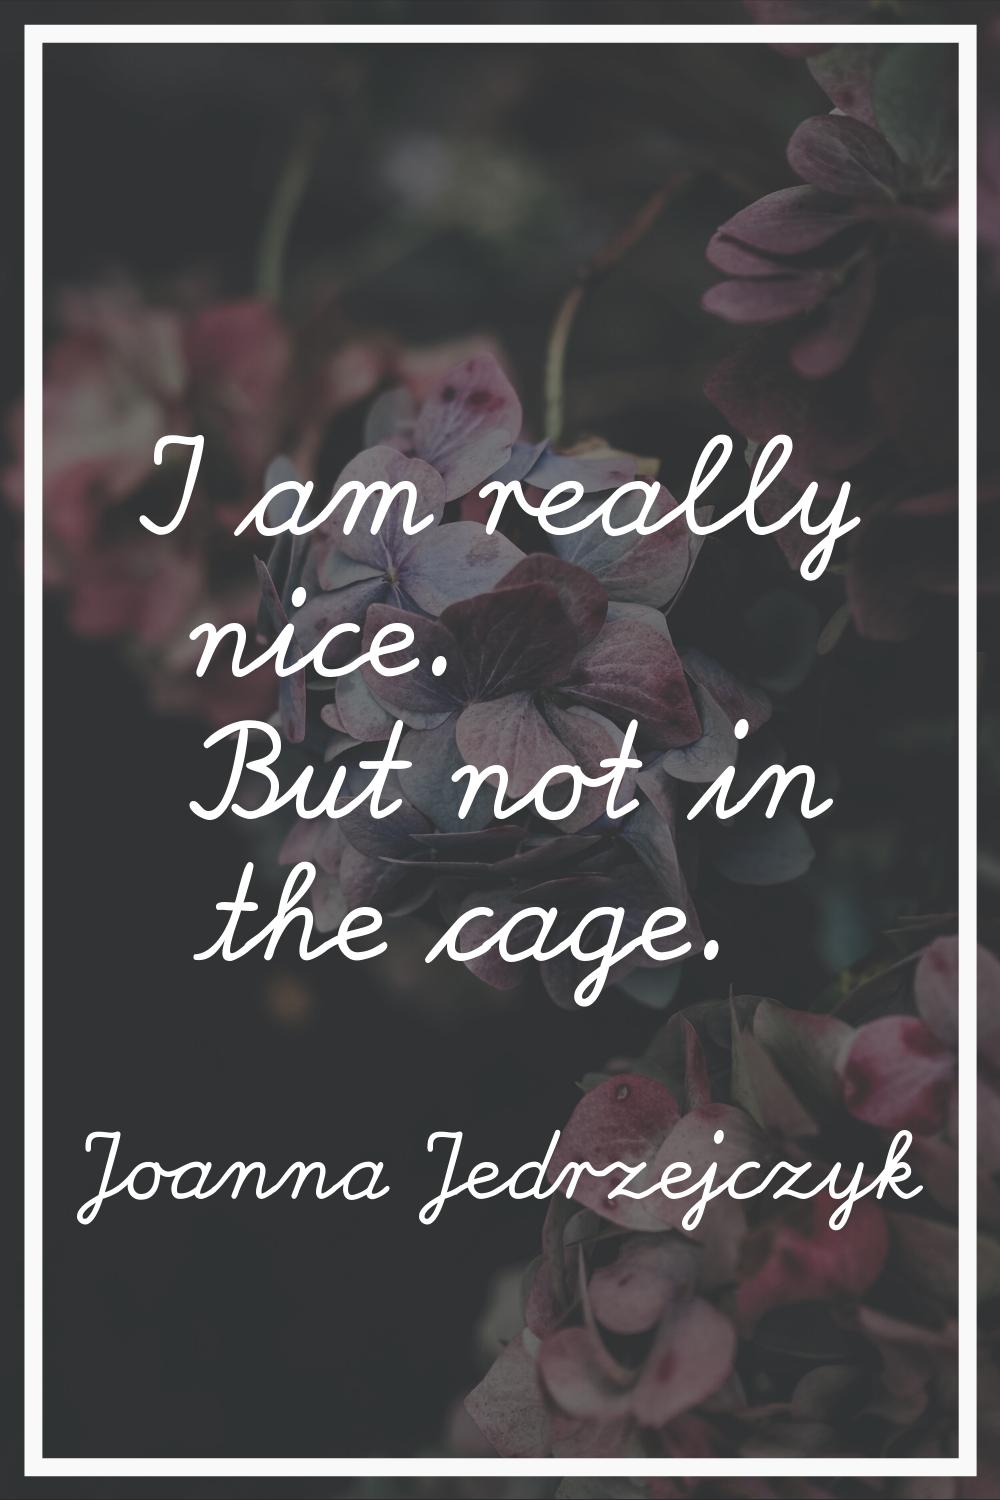 I am really nice. But not in the cage.